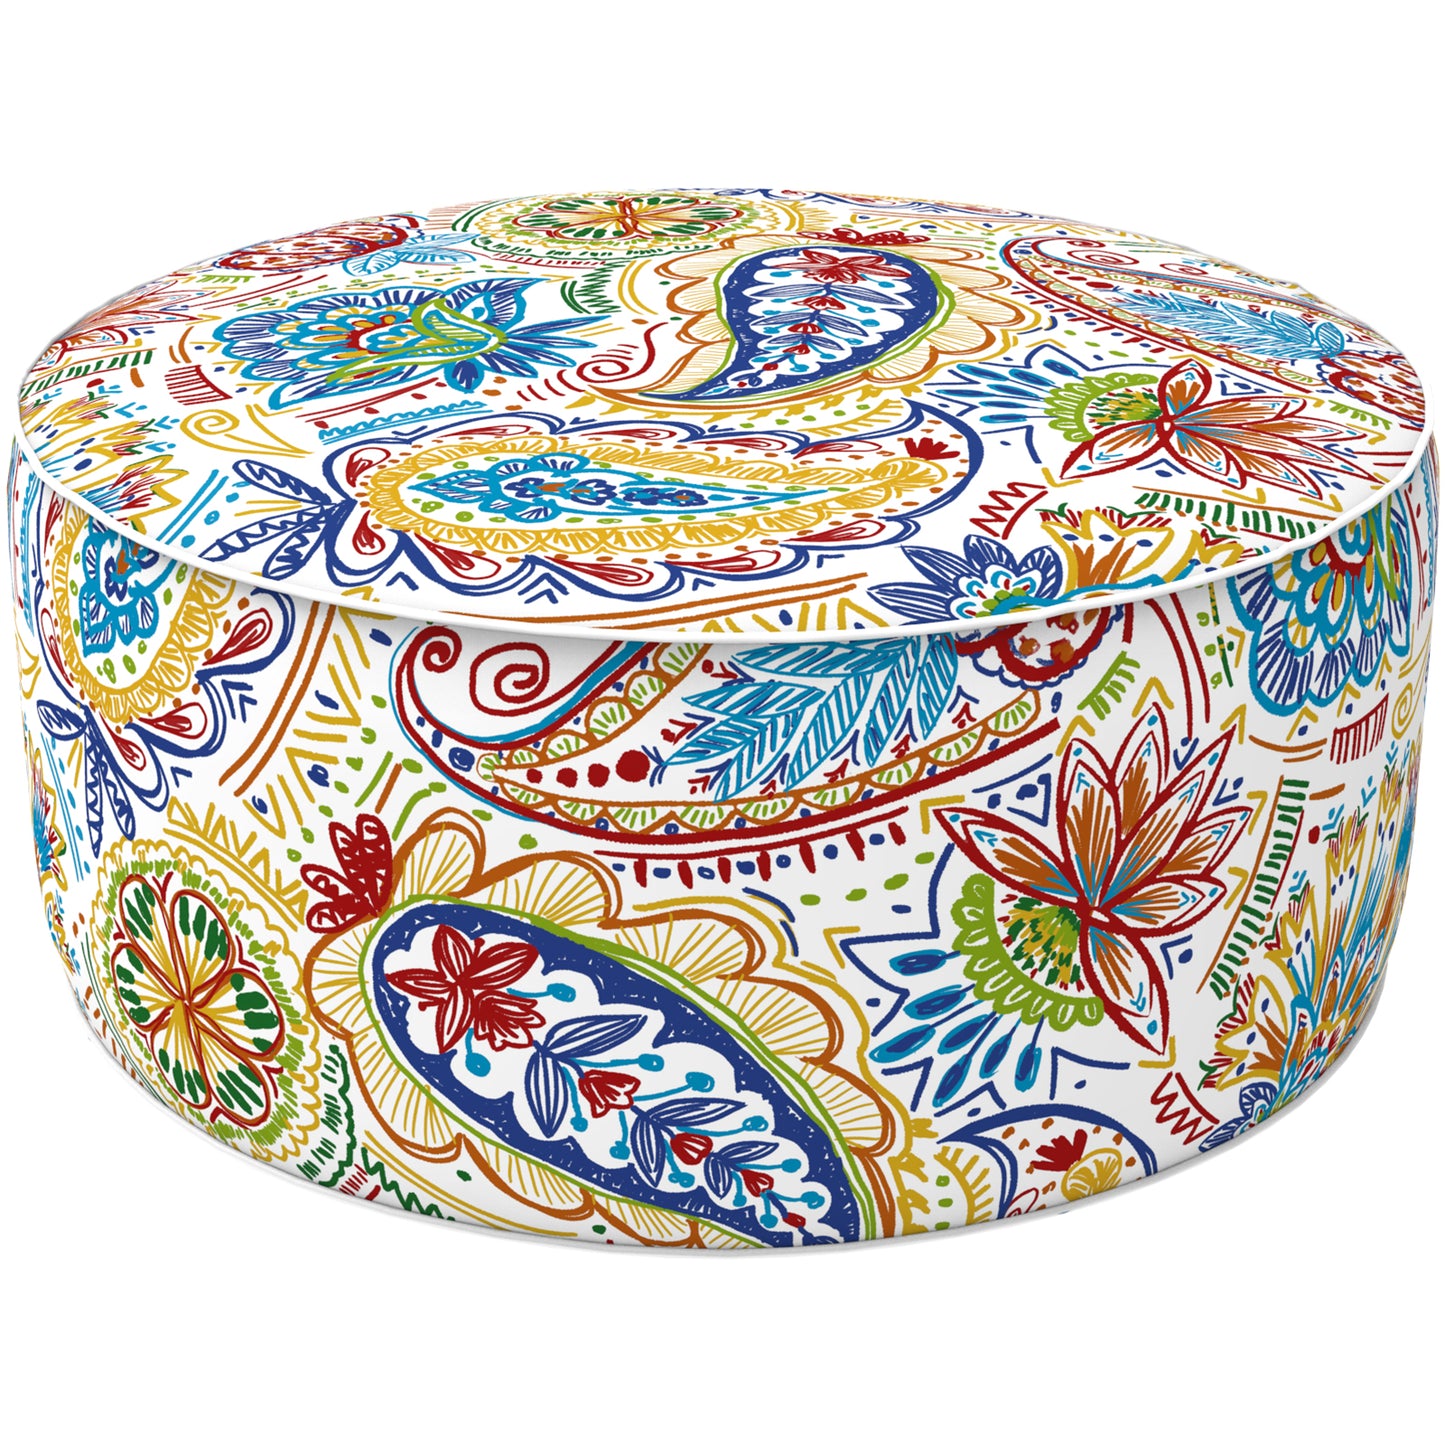 Melody Elephant Patio Inflatable Ottoman, 21x9 Inch Portable Stool Ottoman with Handle, Outdoor Round Footrest Stool for Garden Camping, Red Paisley